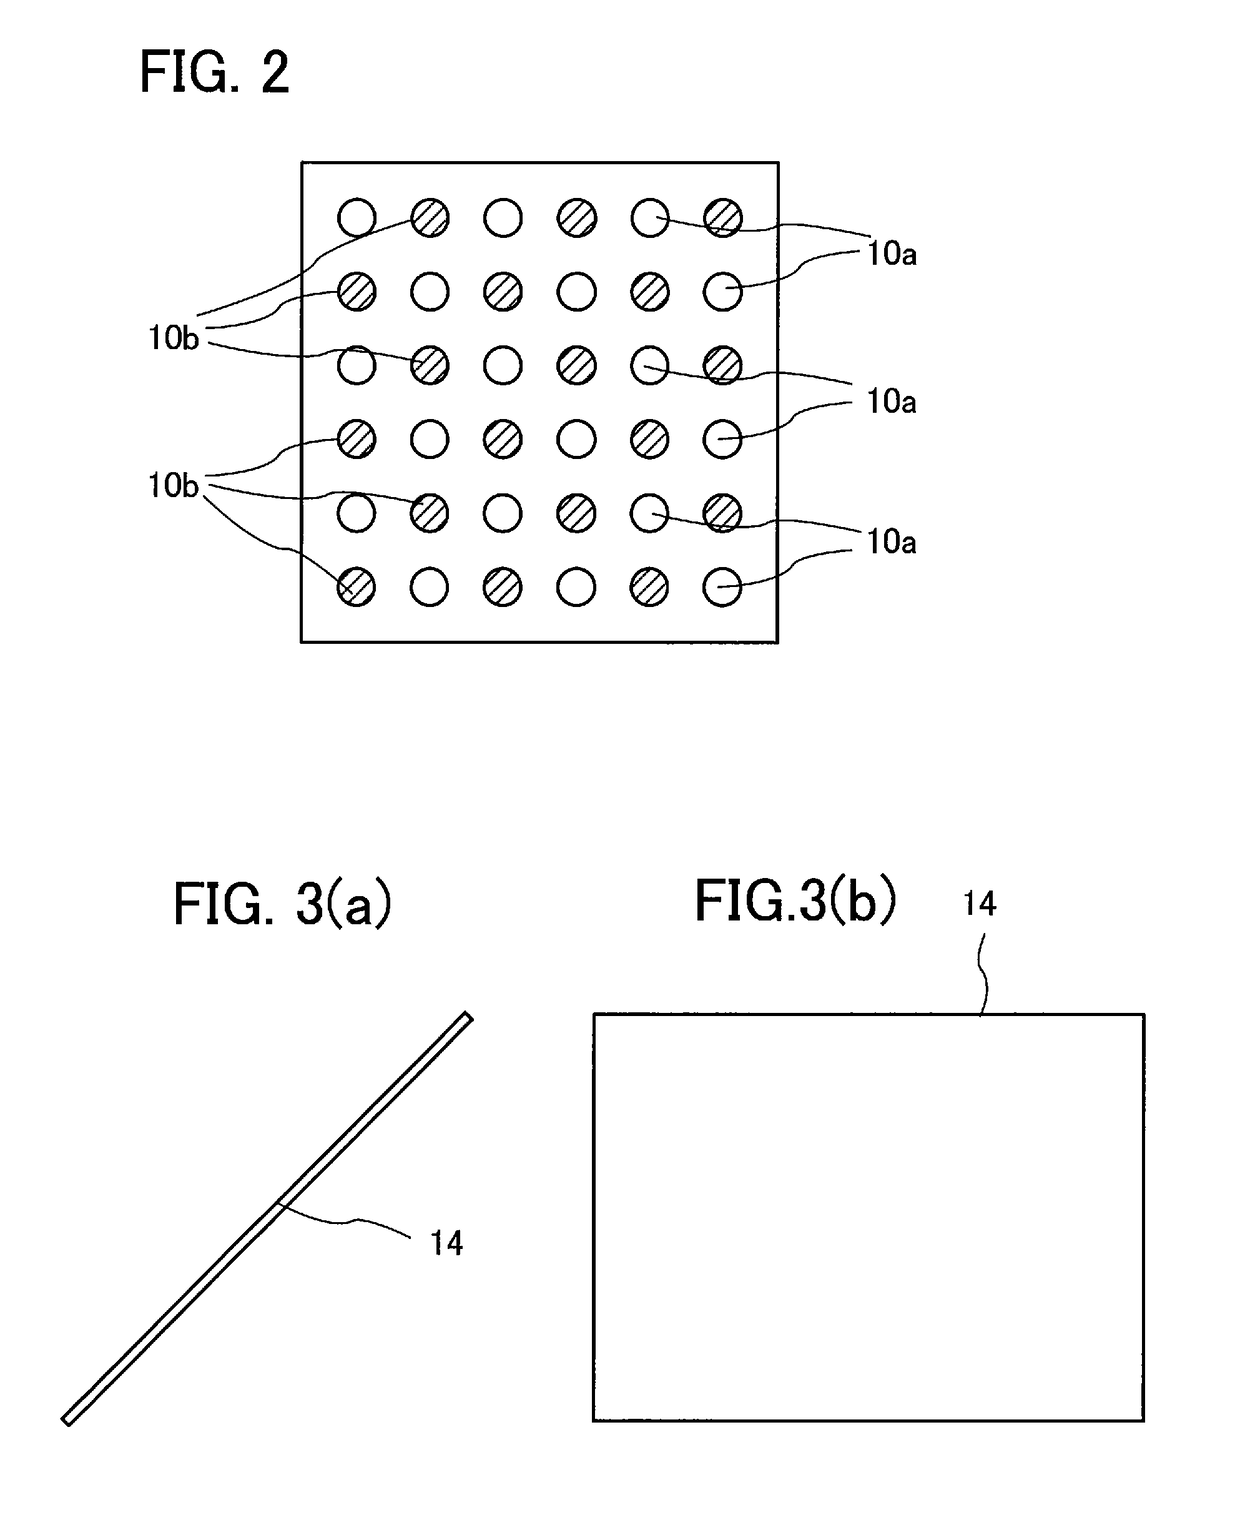 Light source device using monochromatic light to excite stationary phosphor layers